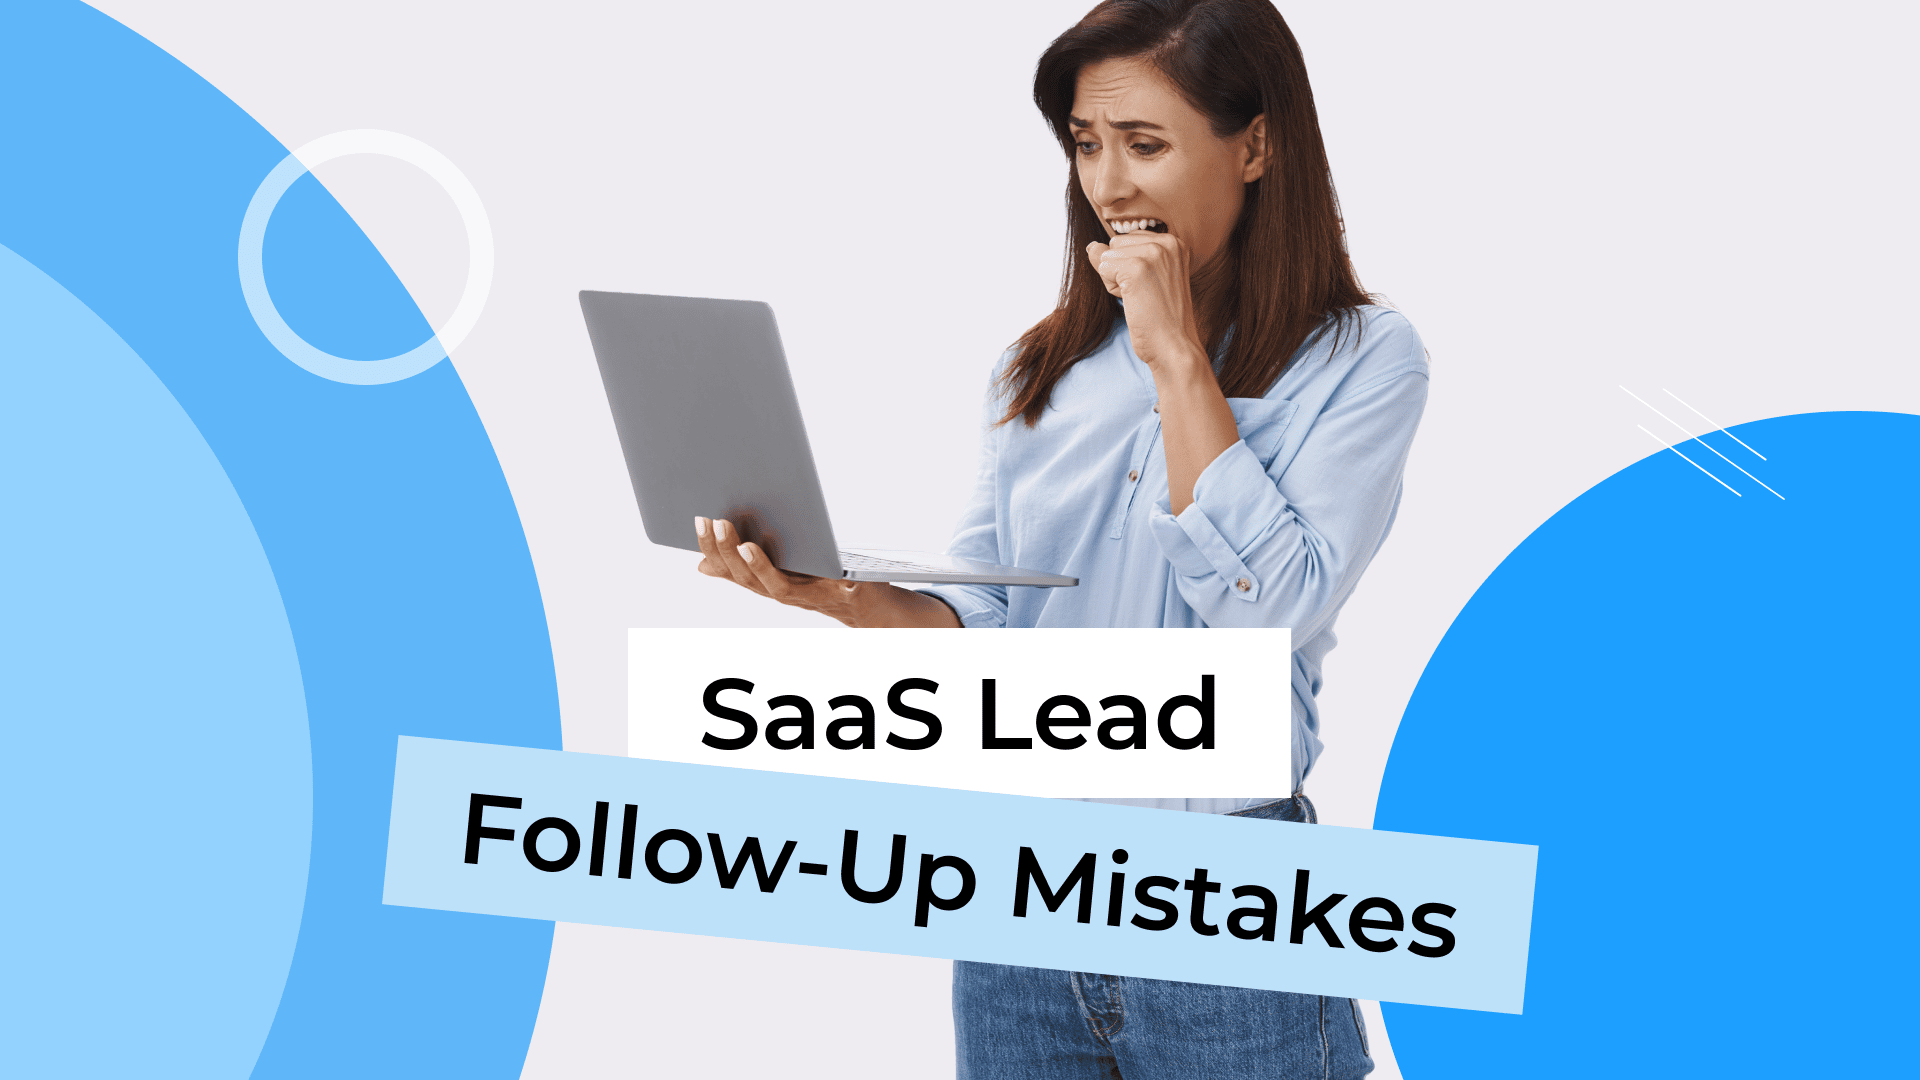 13 SaaS Lead Follow-Up Mistakes and How to Avoid Them